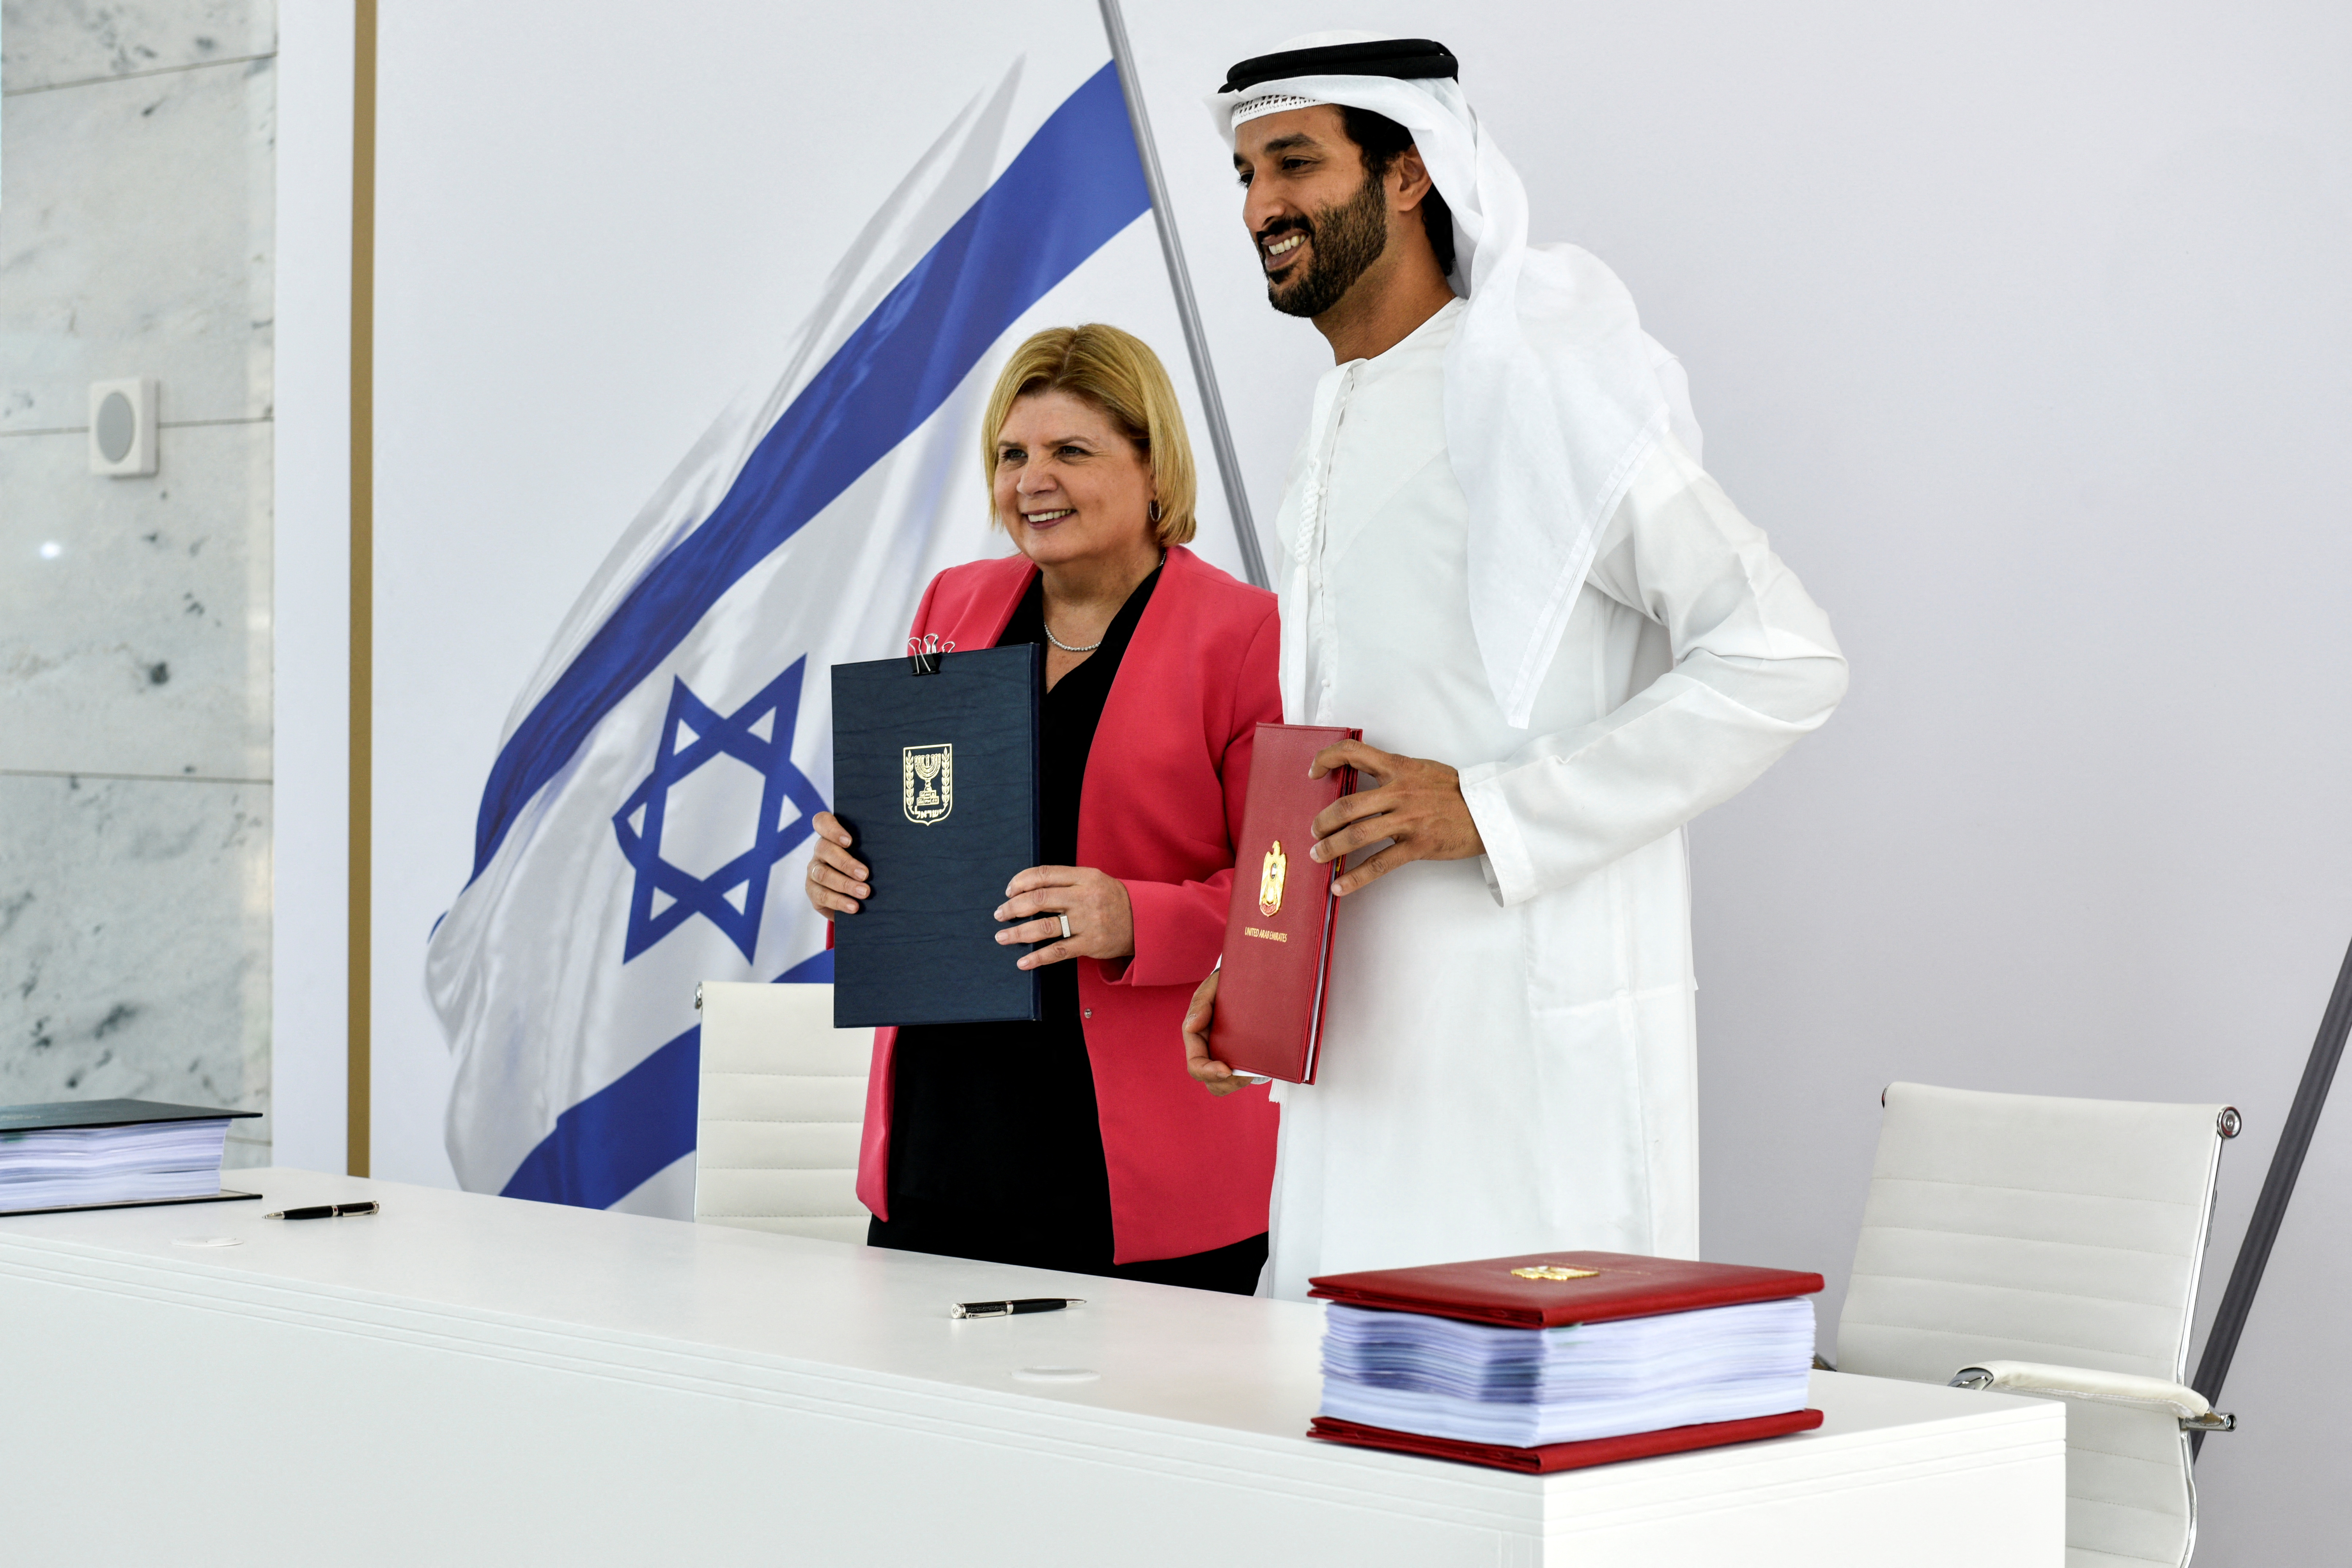 Israel and UAE sign a Free Trade Agreement in Dubai